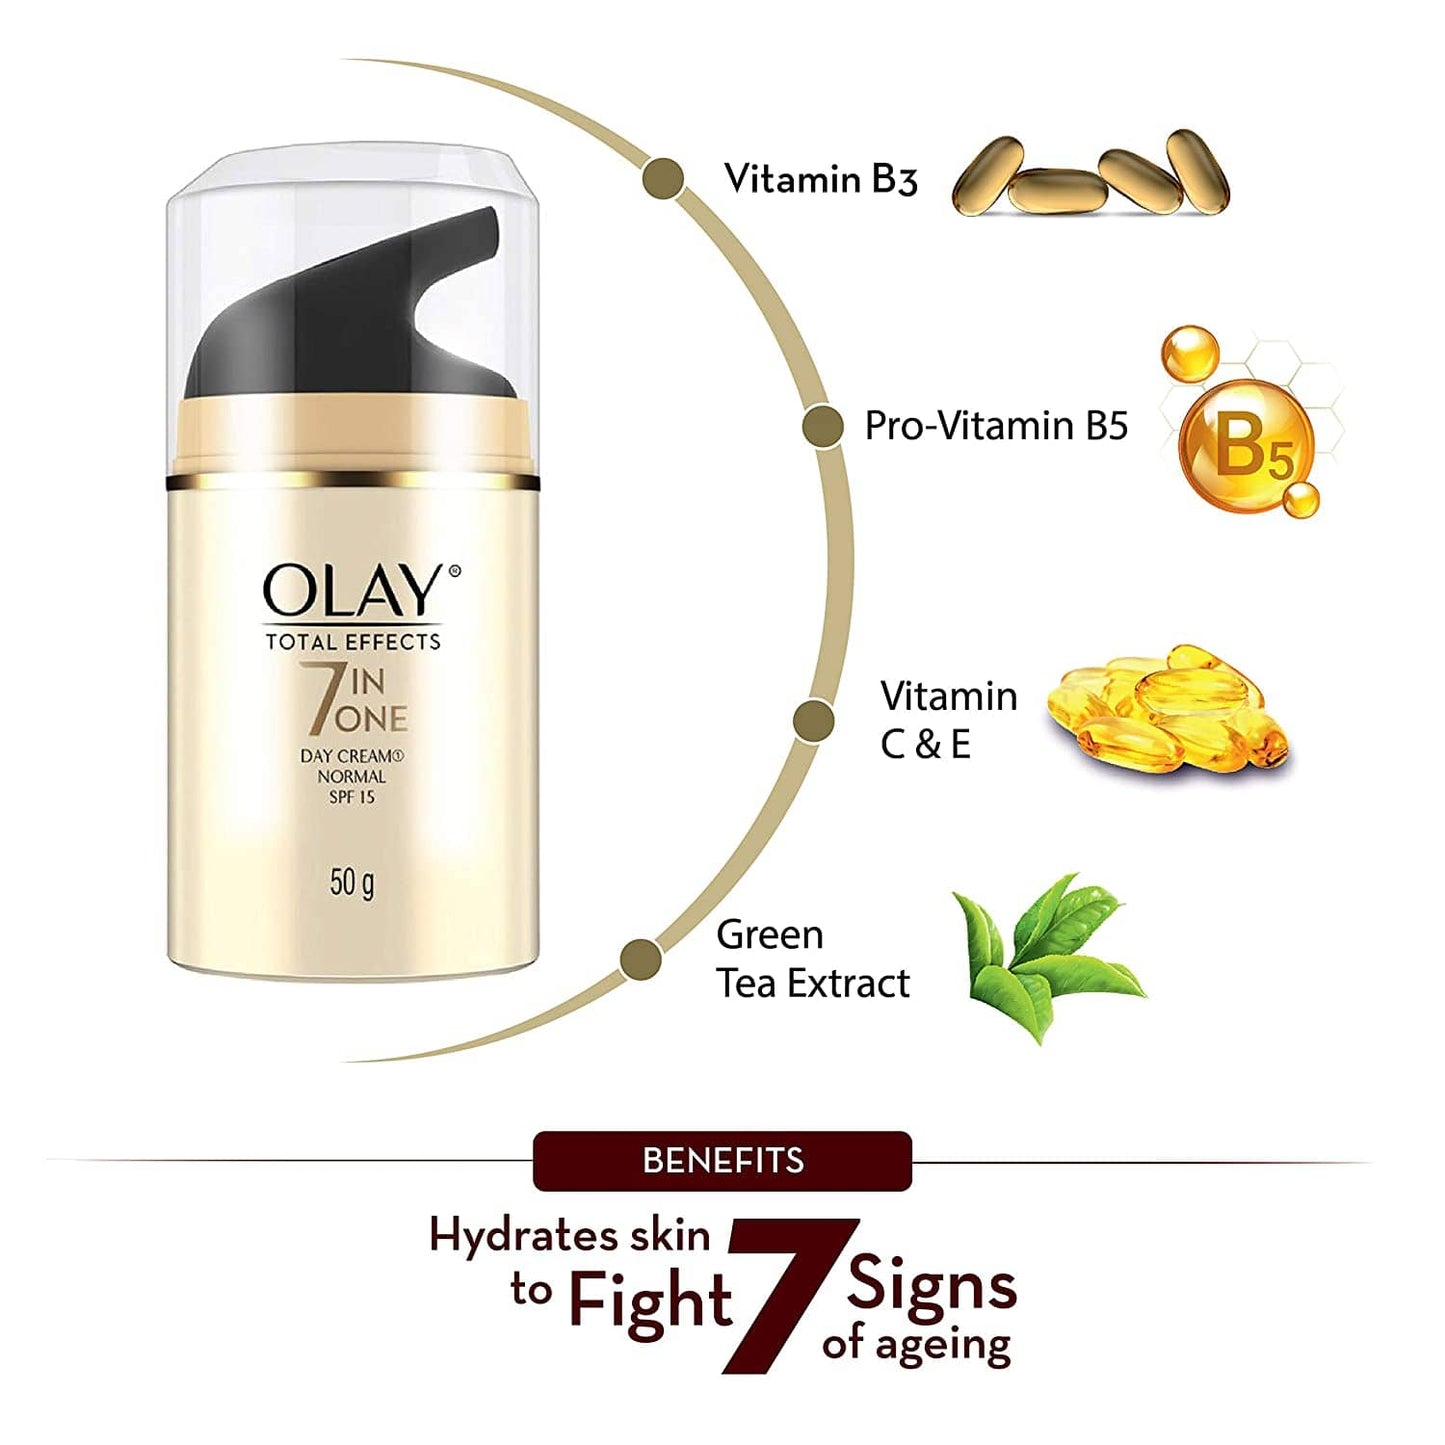 Olay Total Effects 7 In One Day Cream with Vitamin B5